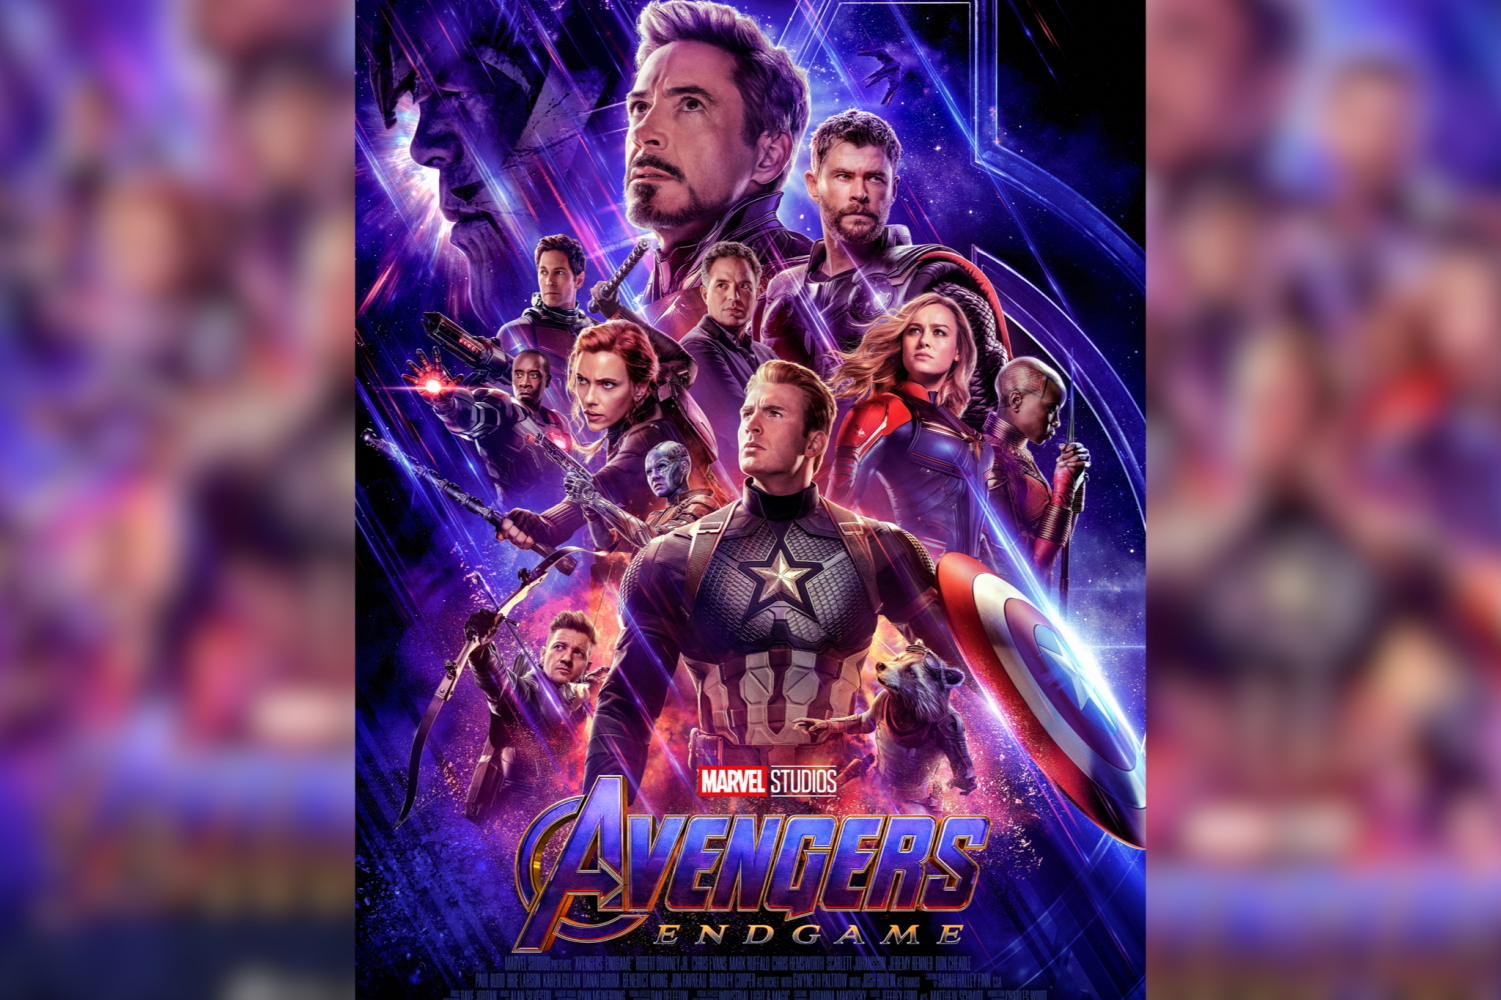 Endgame': Is 'Endgame' the Real End Game?